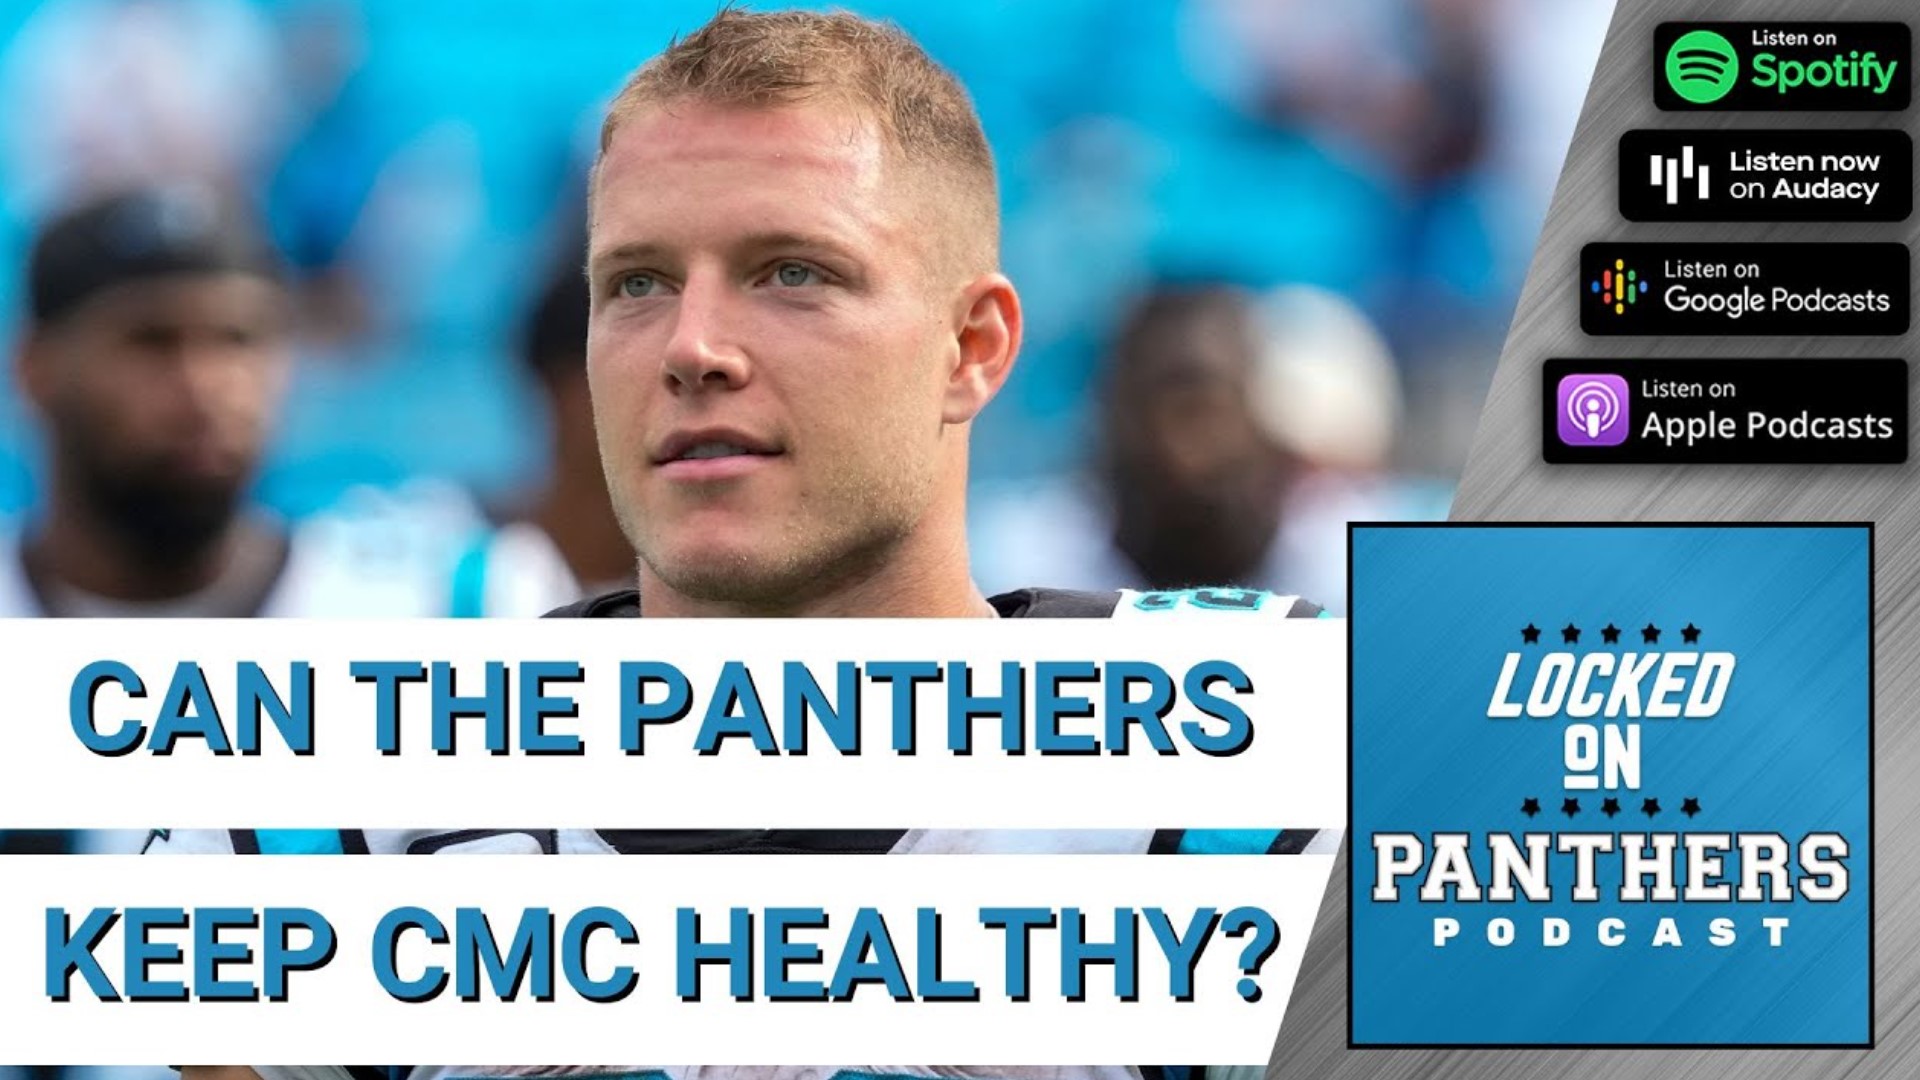 It's no secret that Christian McCaffrey has struggled to stay healthy the past two seasons. Will the team's new approach aid in keeping McCaffrey fresh?